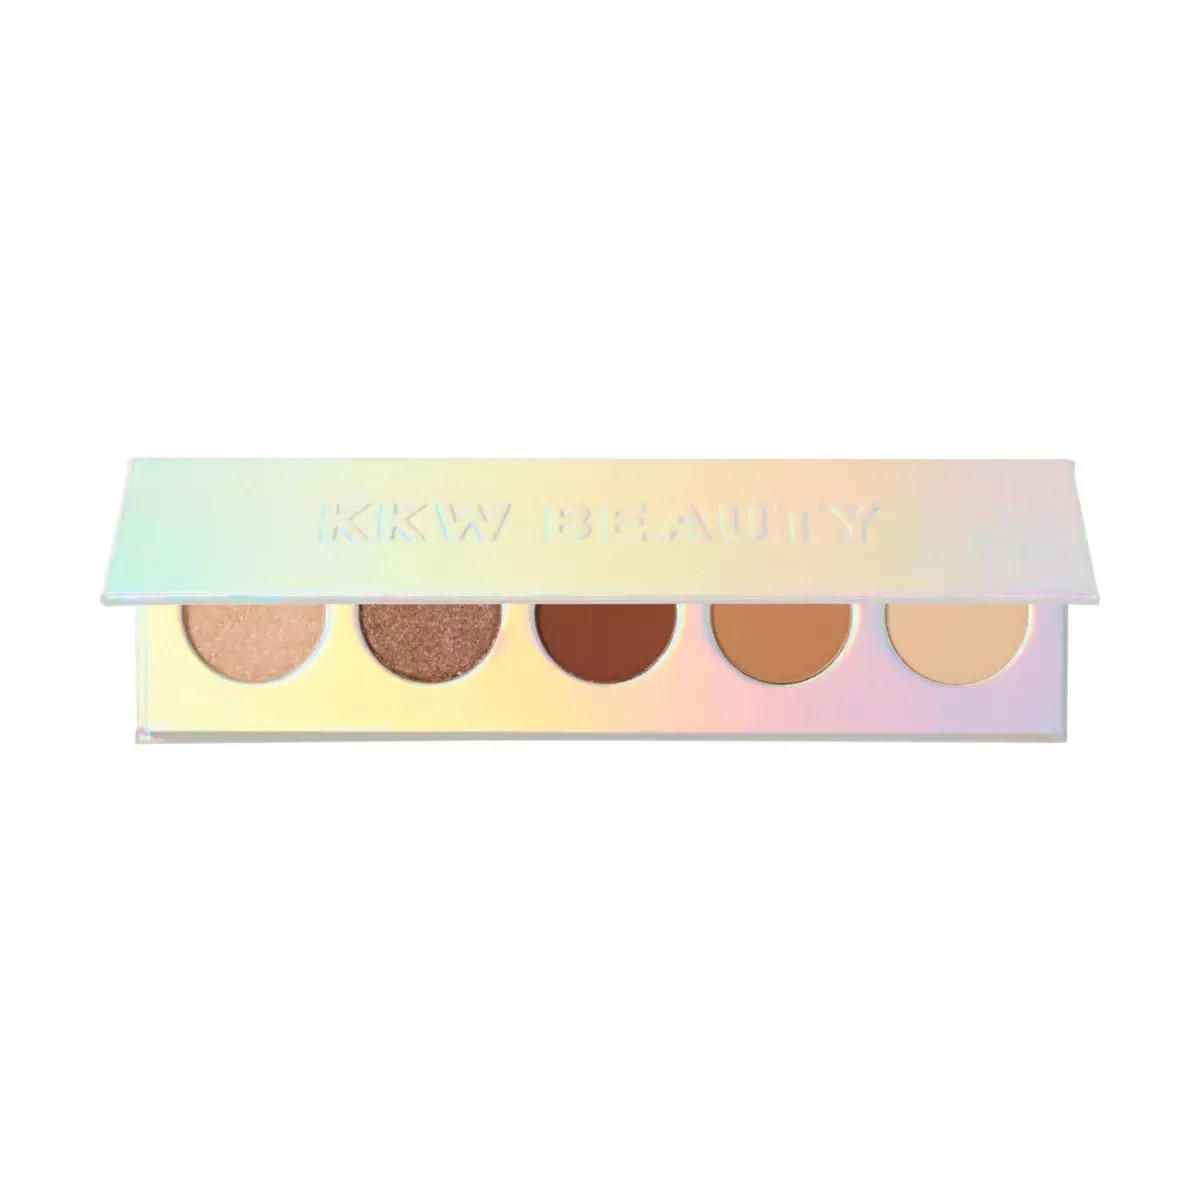 2nd Chance KKW Beauty Holiday 2020 Eyeshadow Palette